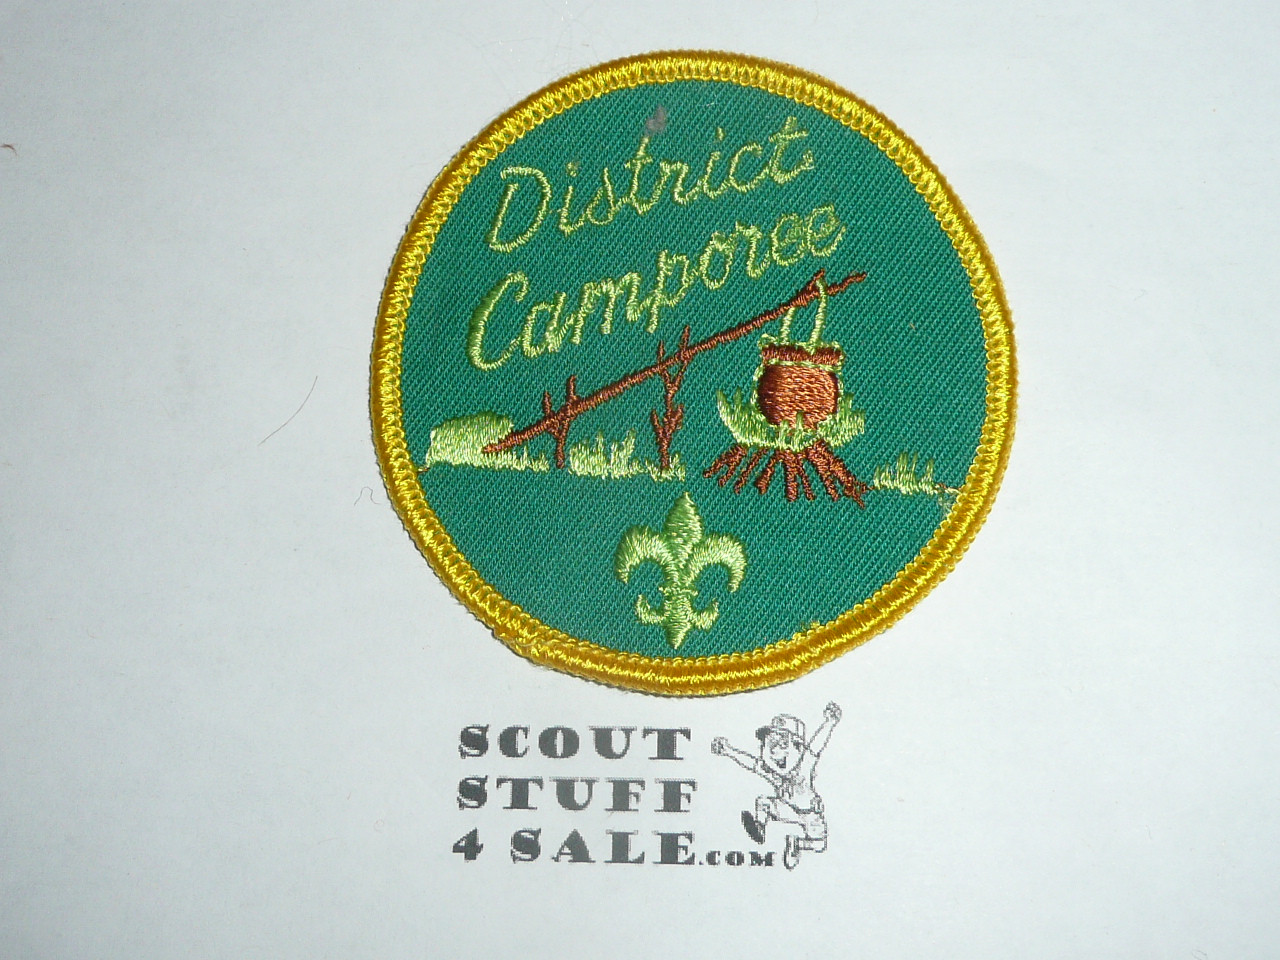 District Camporee Patch, Generic BSA issue, grn twill, yel r/e bdr